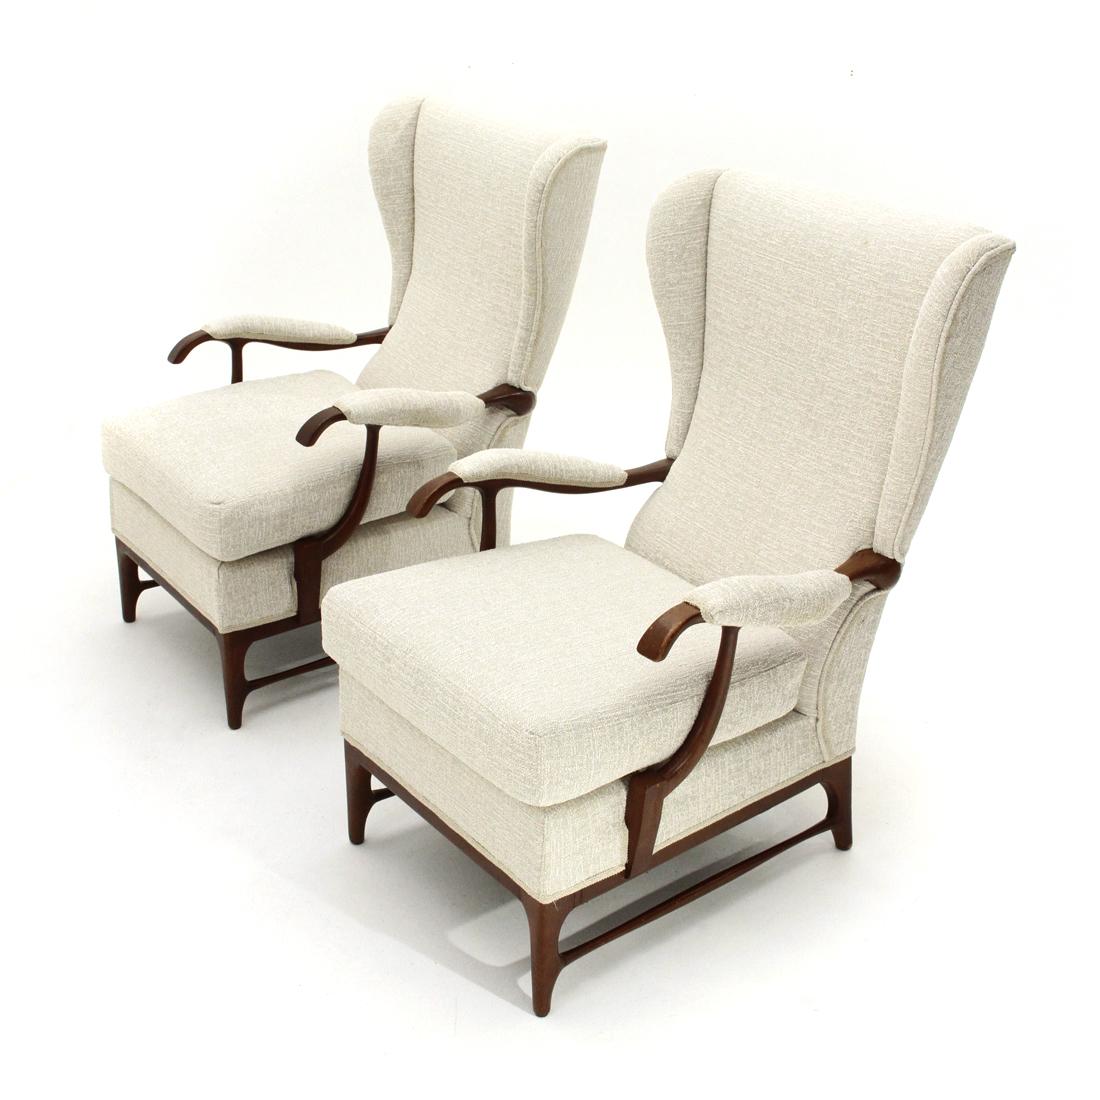 Fabric Pair of armchairs in ivory white fabric by Framar, 1950s For Sale